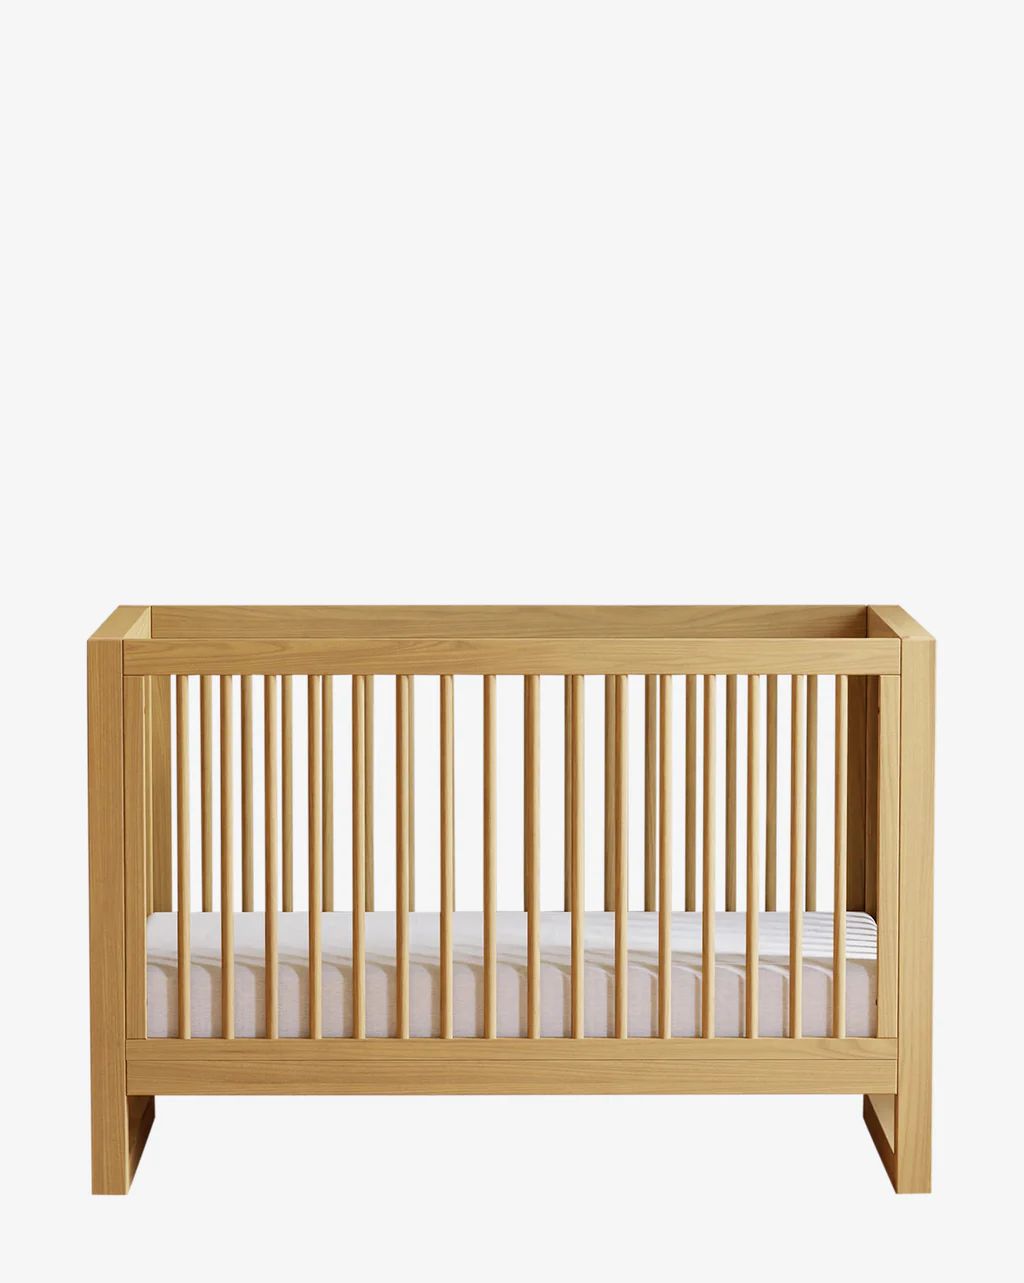 Nantucket 3-in-1 Convertible Crib with Toddler Bed Conversion Kit | McGee & Co.